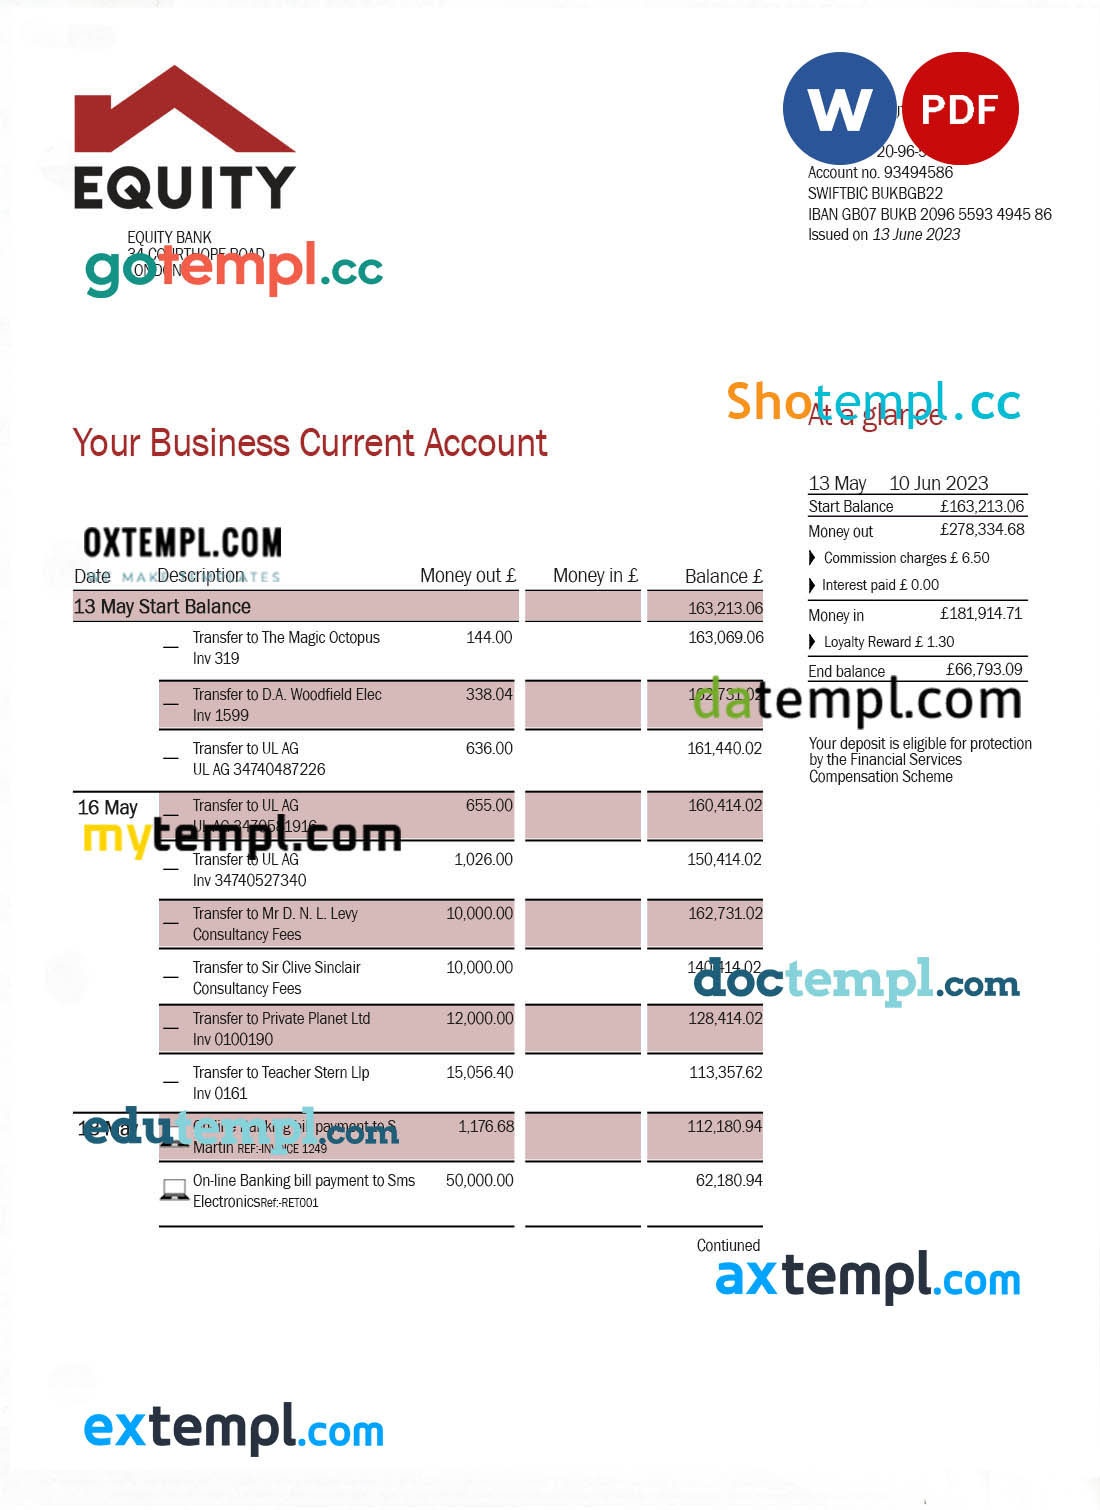 Egypt hotel booking confirmation Word and PDF template, 2 pages